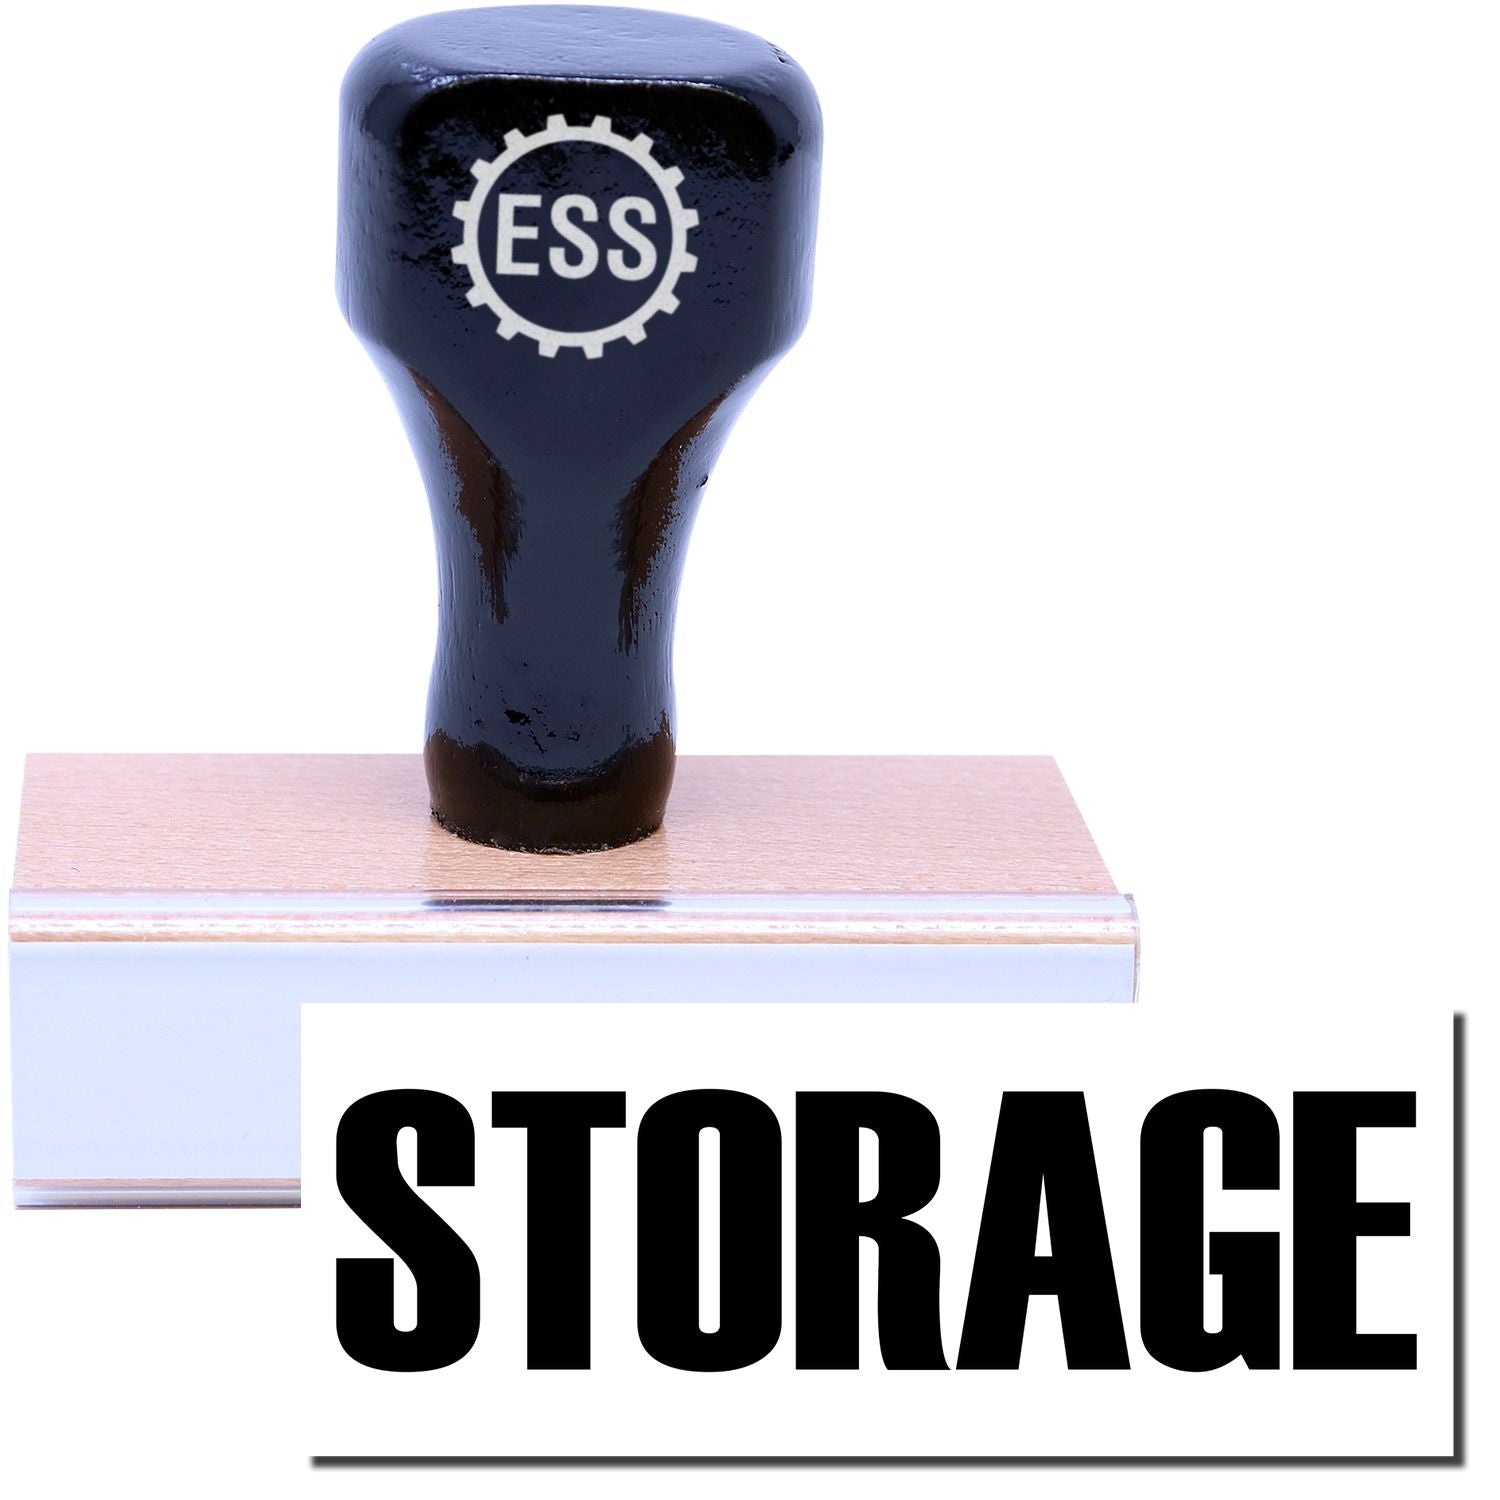 A stock office rubber stamp with a stamped image showing how the text "STORAGE" in a large font is displayed after stamping.